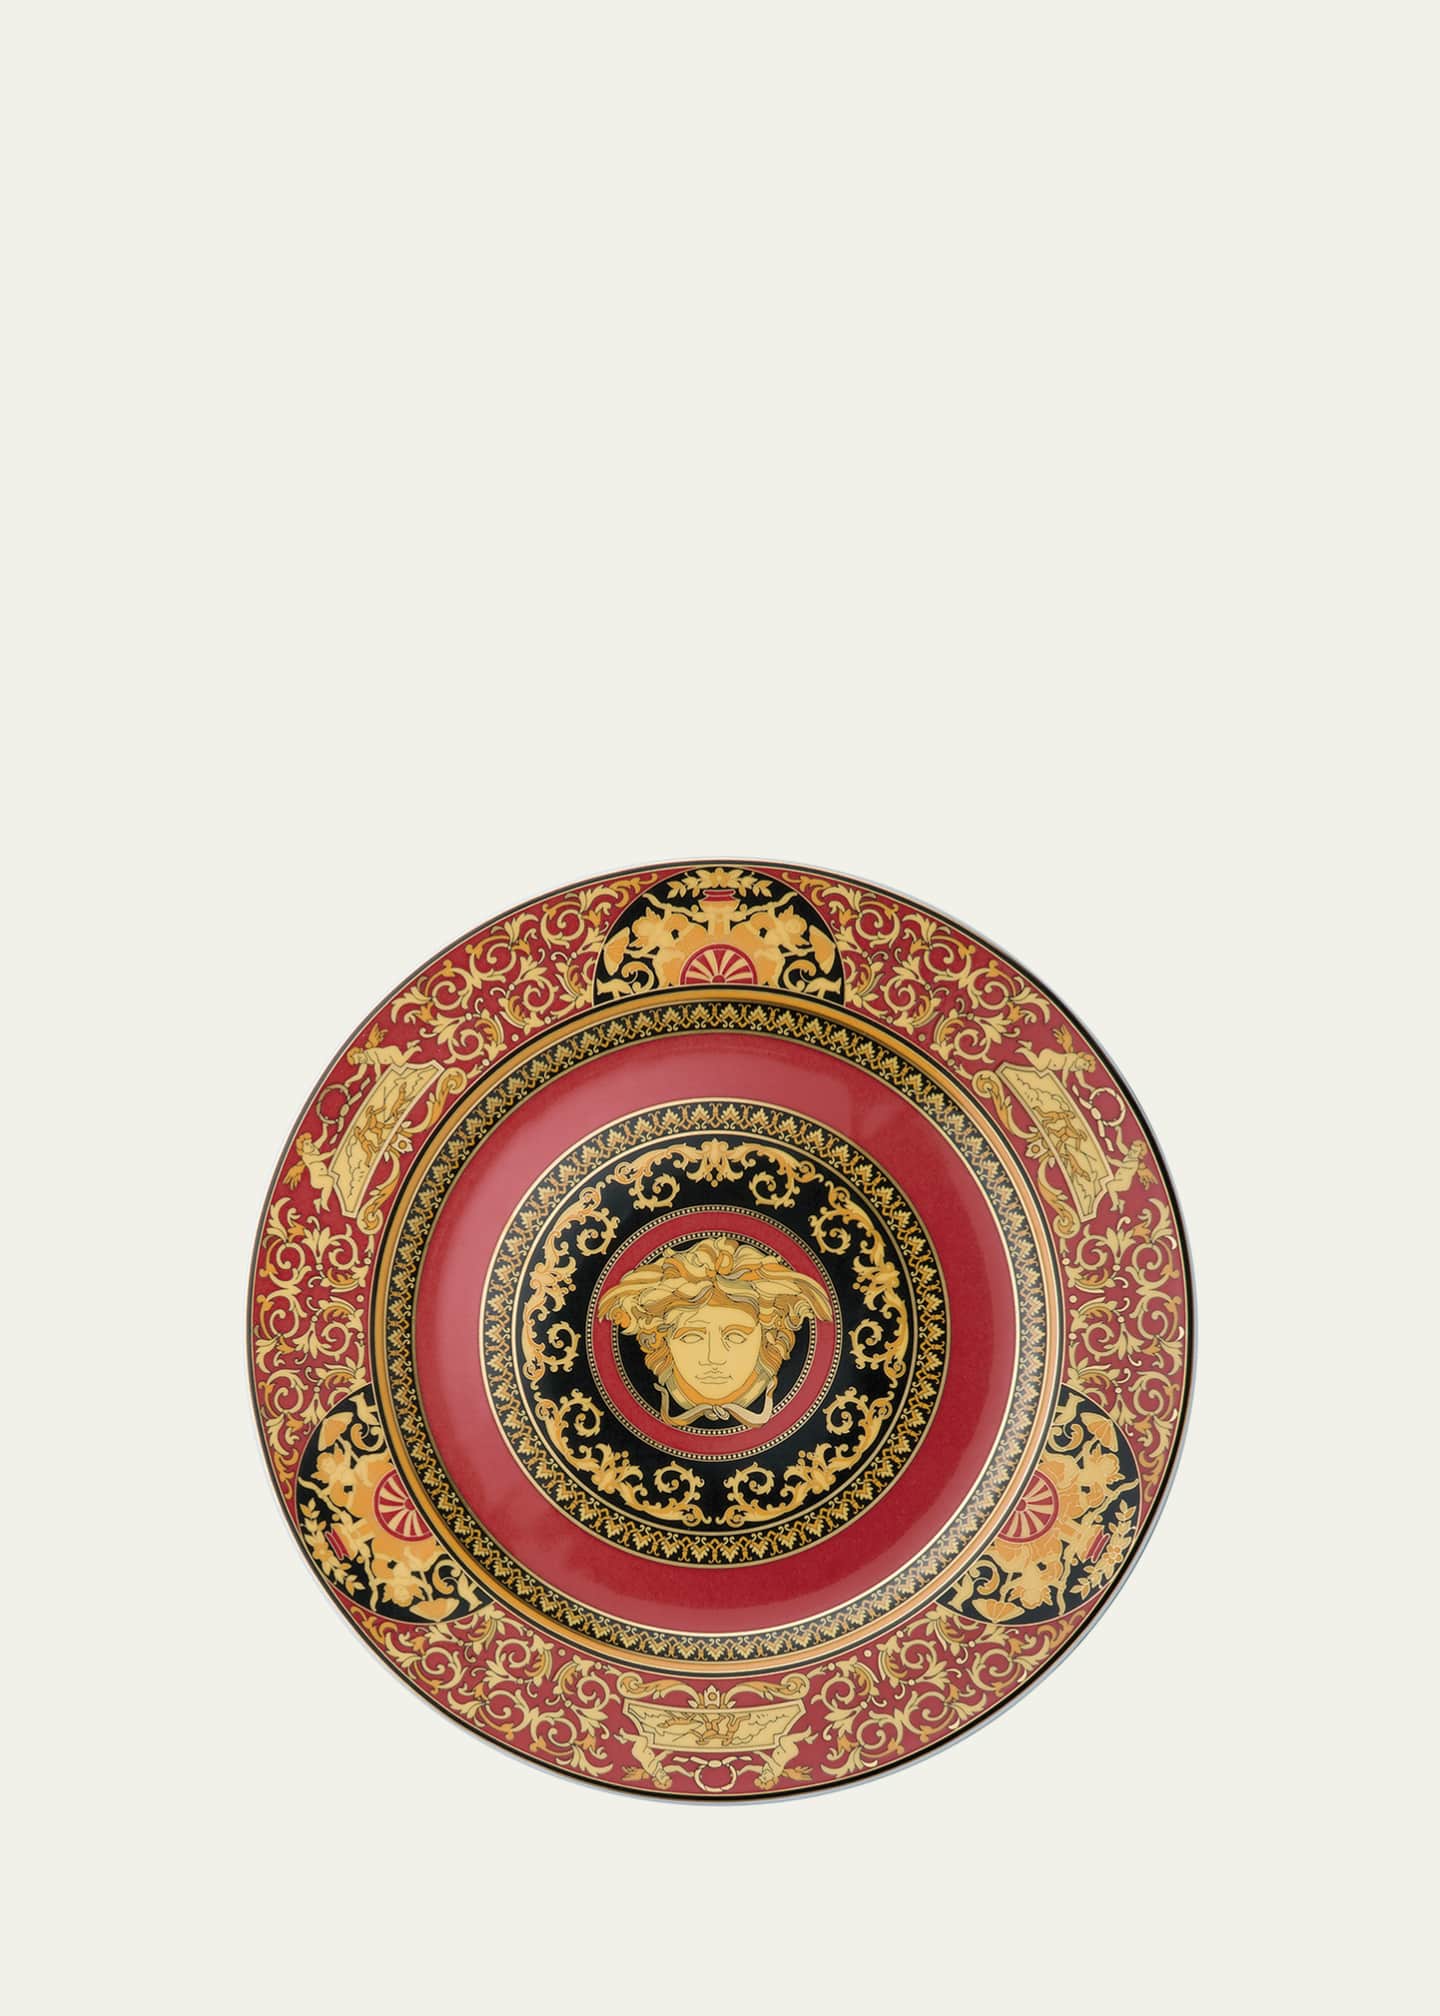 Versace Medusa Charger Plate Image 2 of 2